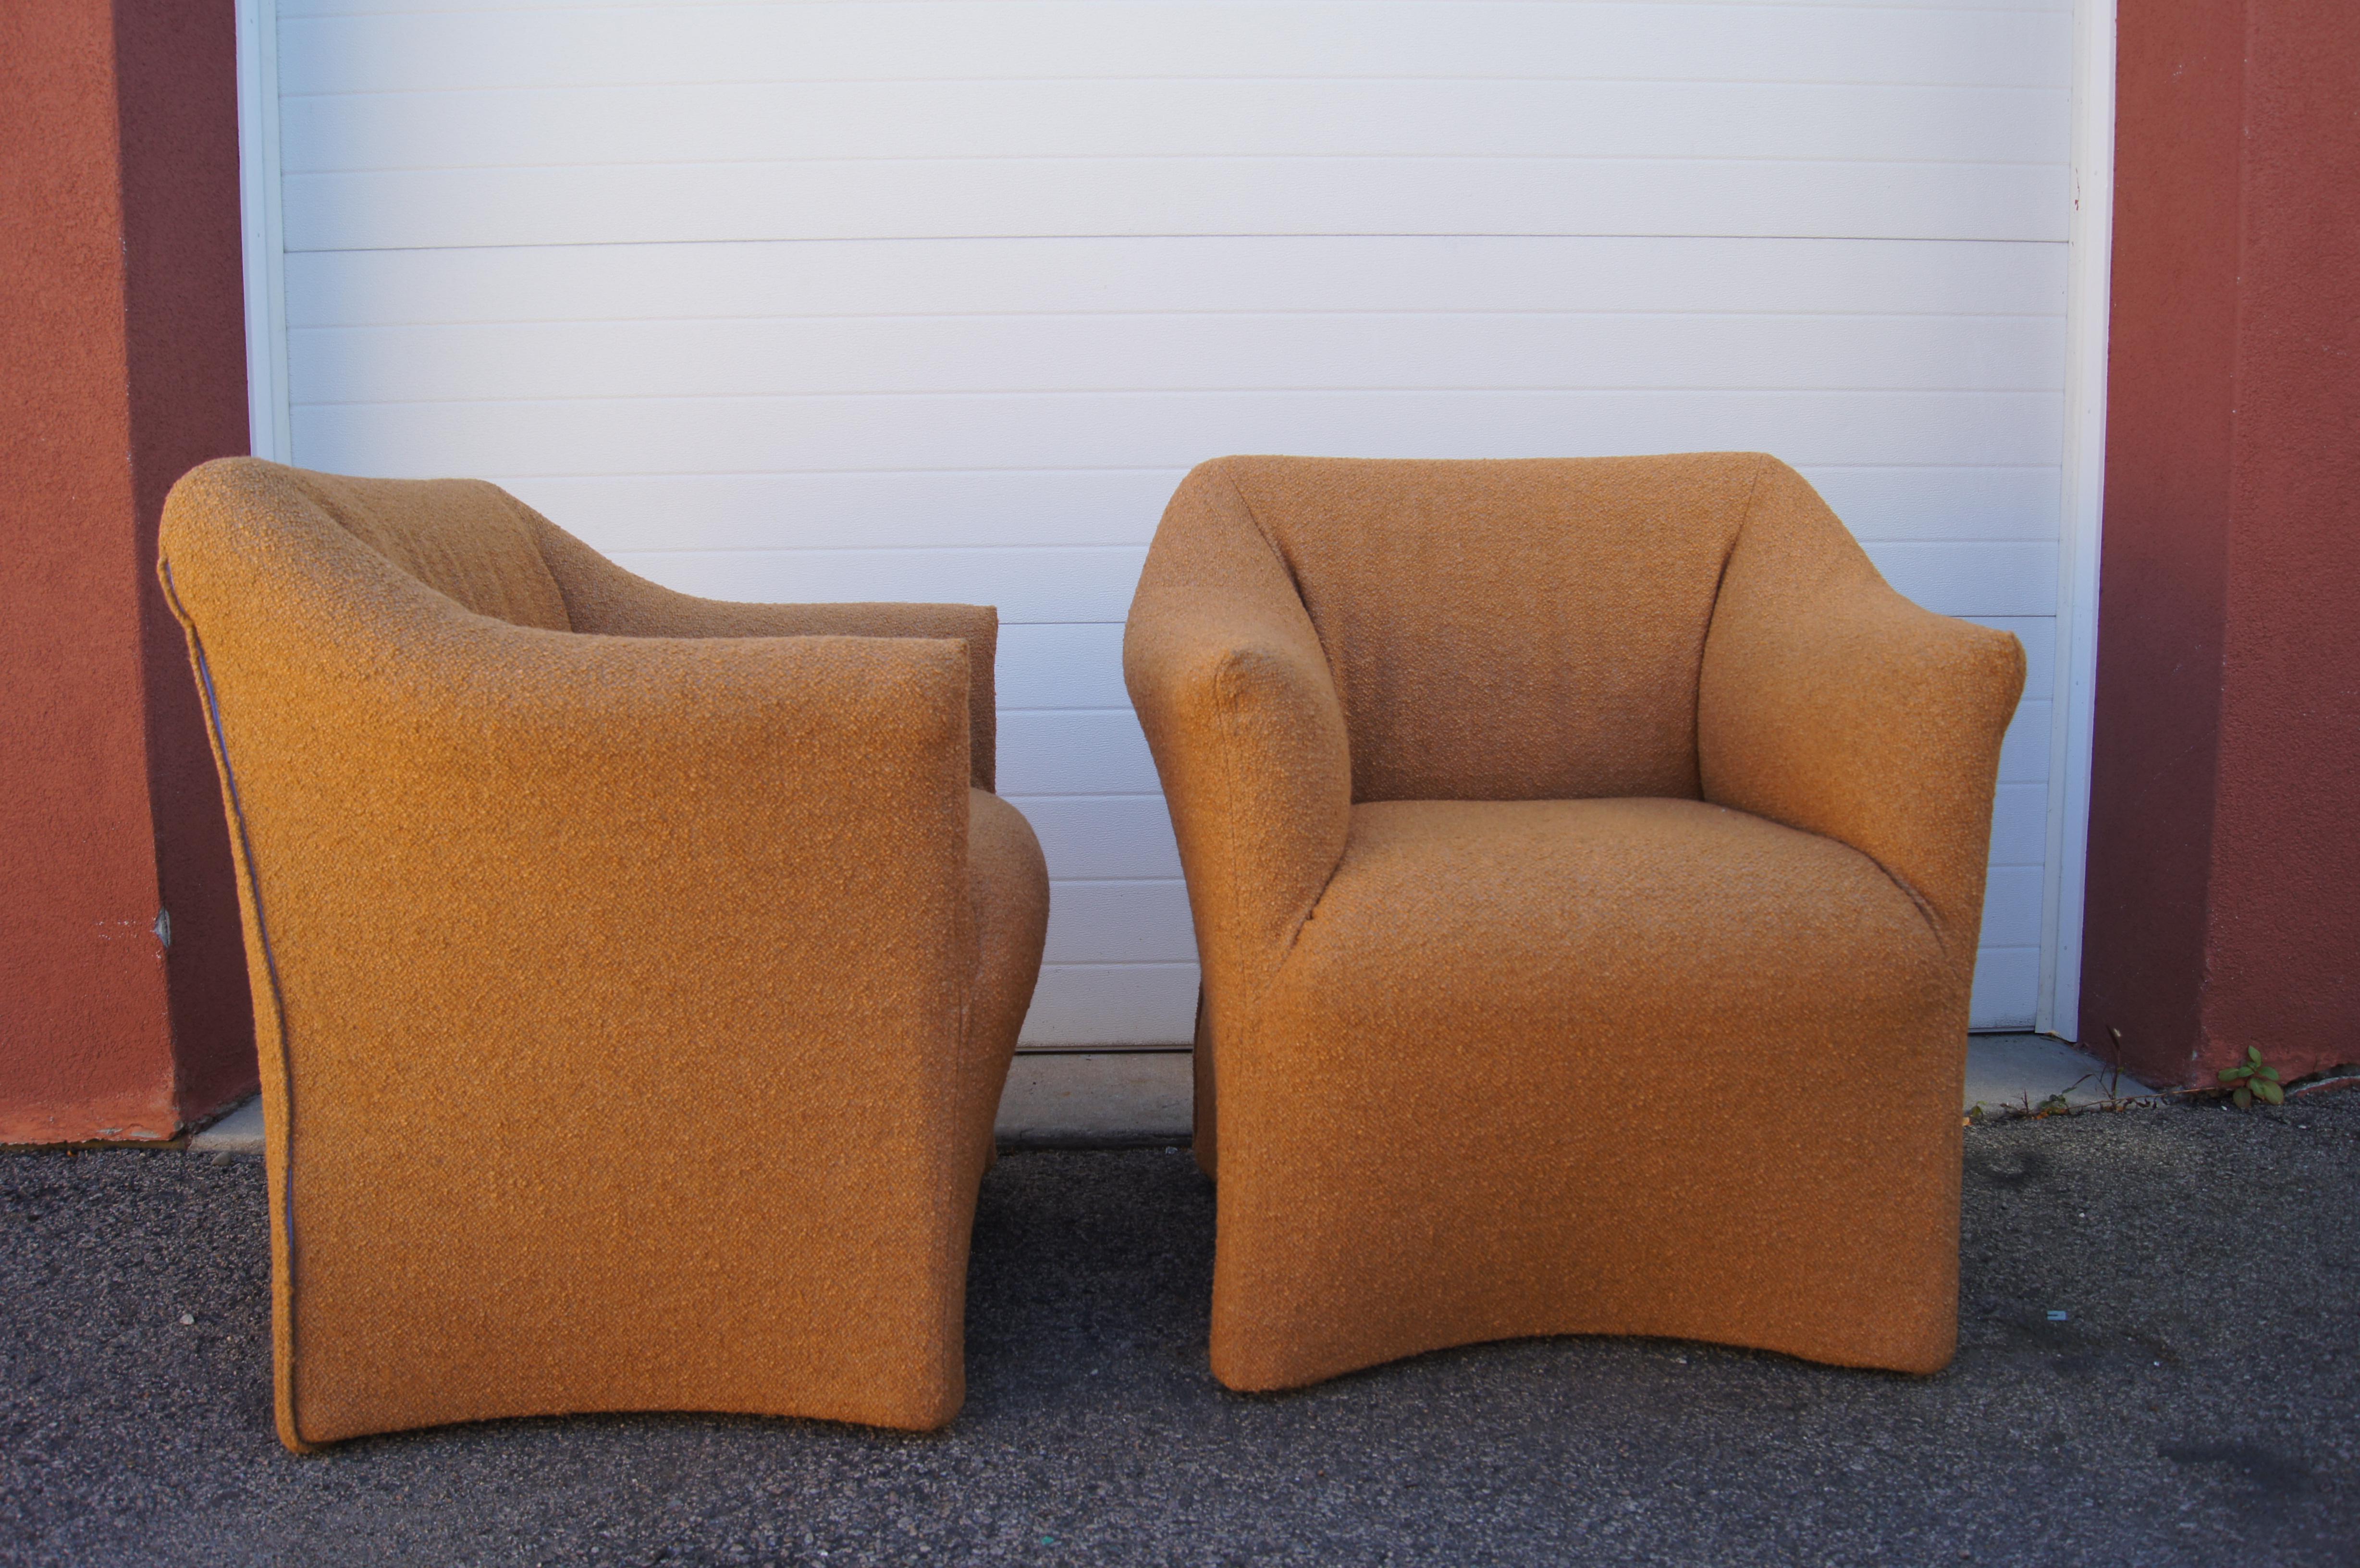 Late 20th Century Pair of Tentazione Lounge Chairs, Model 684, by Mario Bellini for Cassina